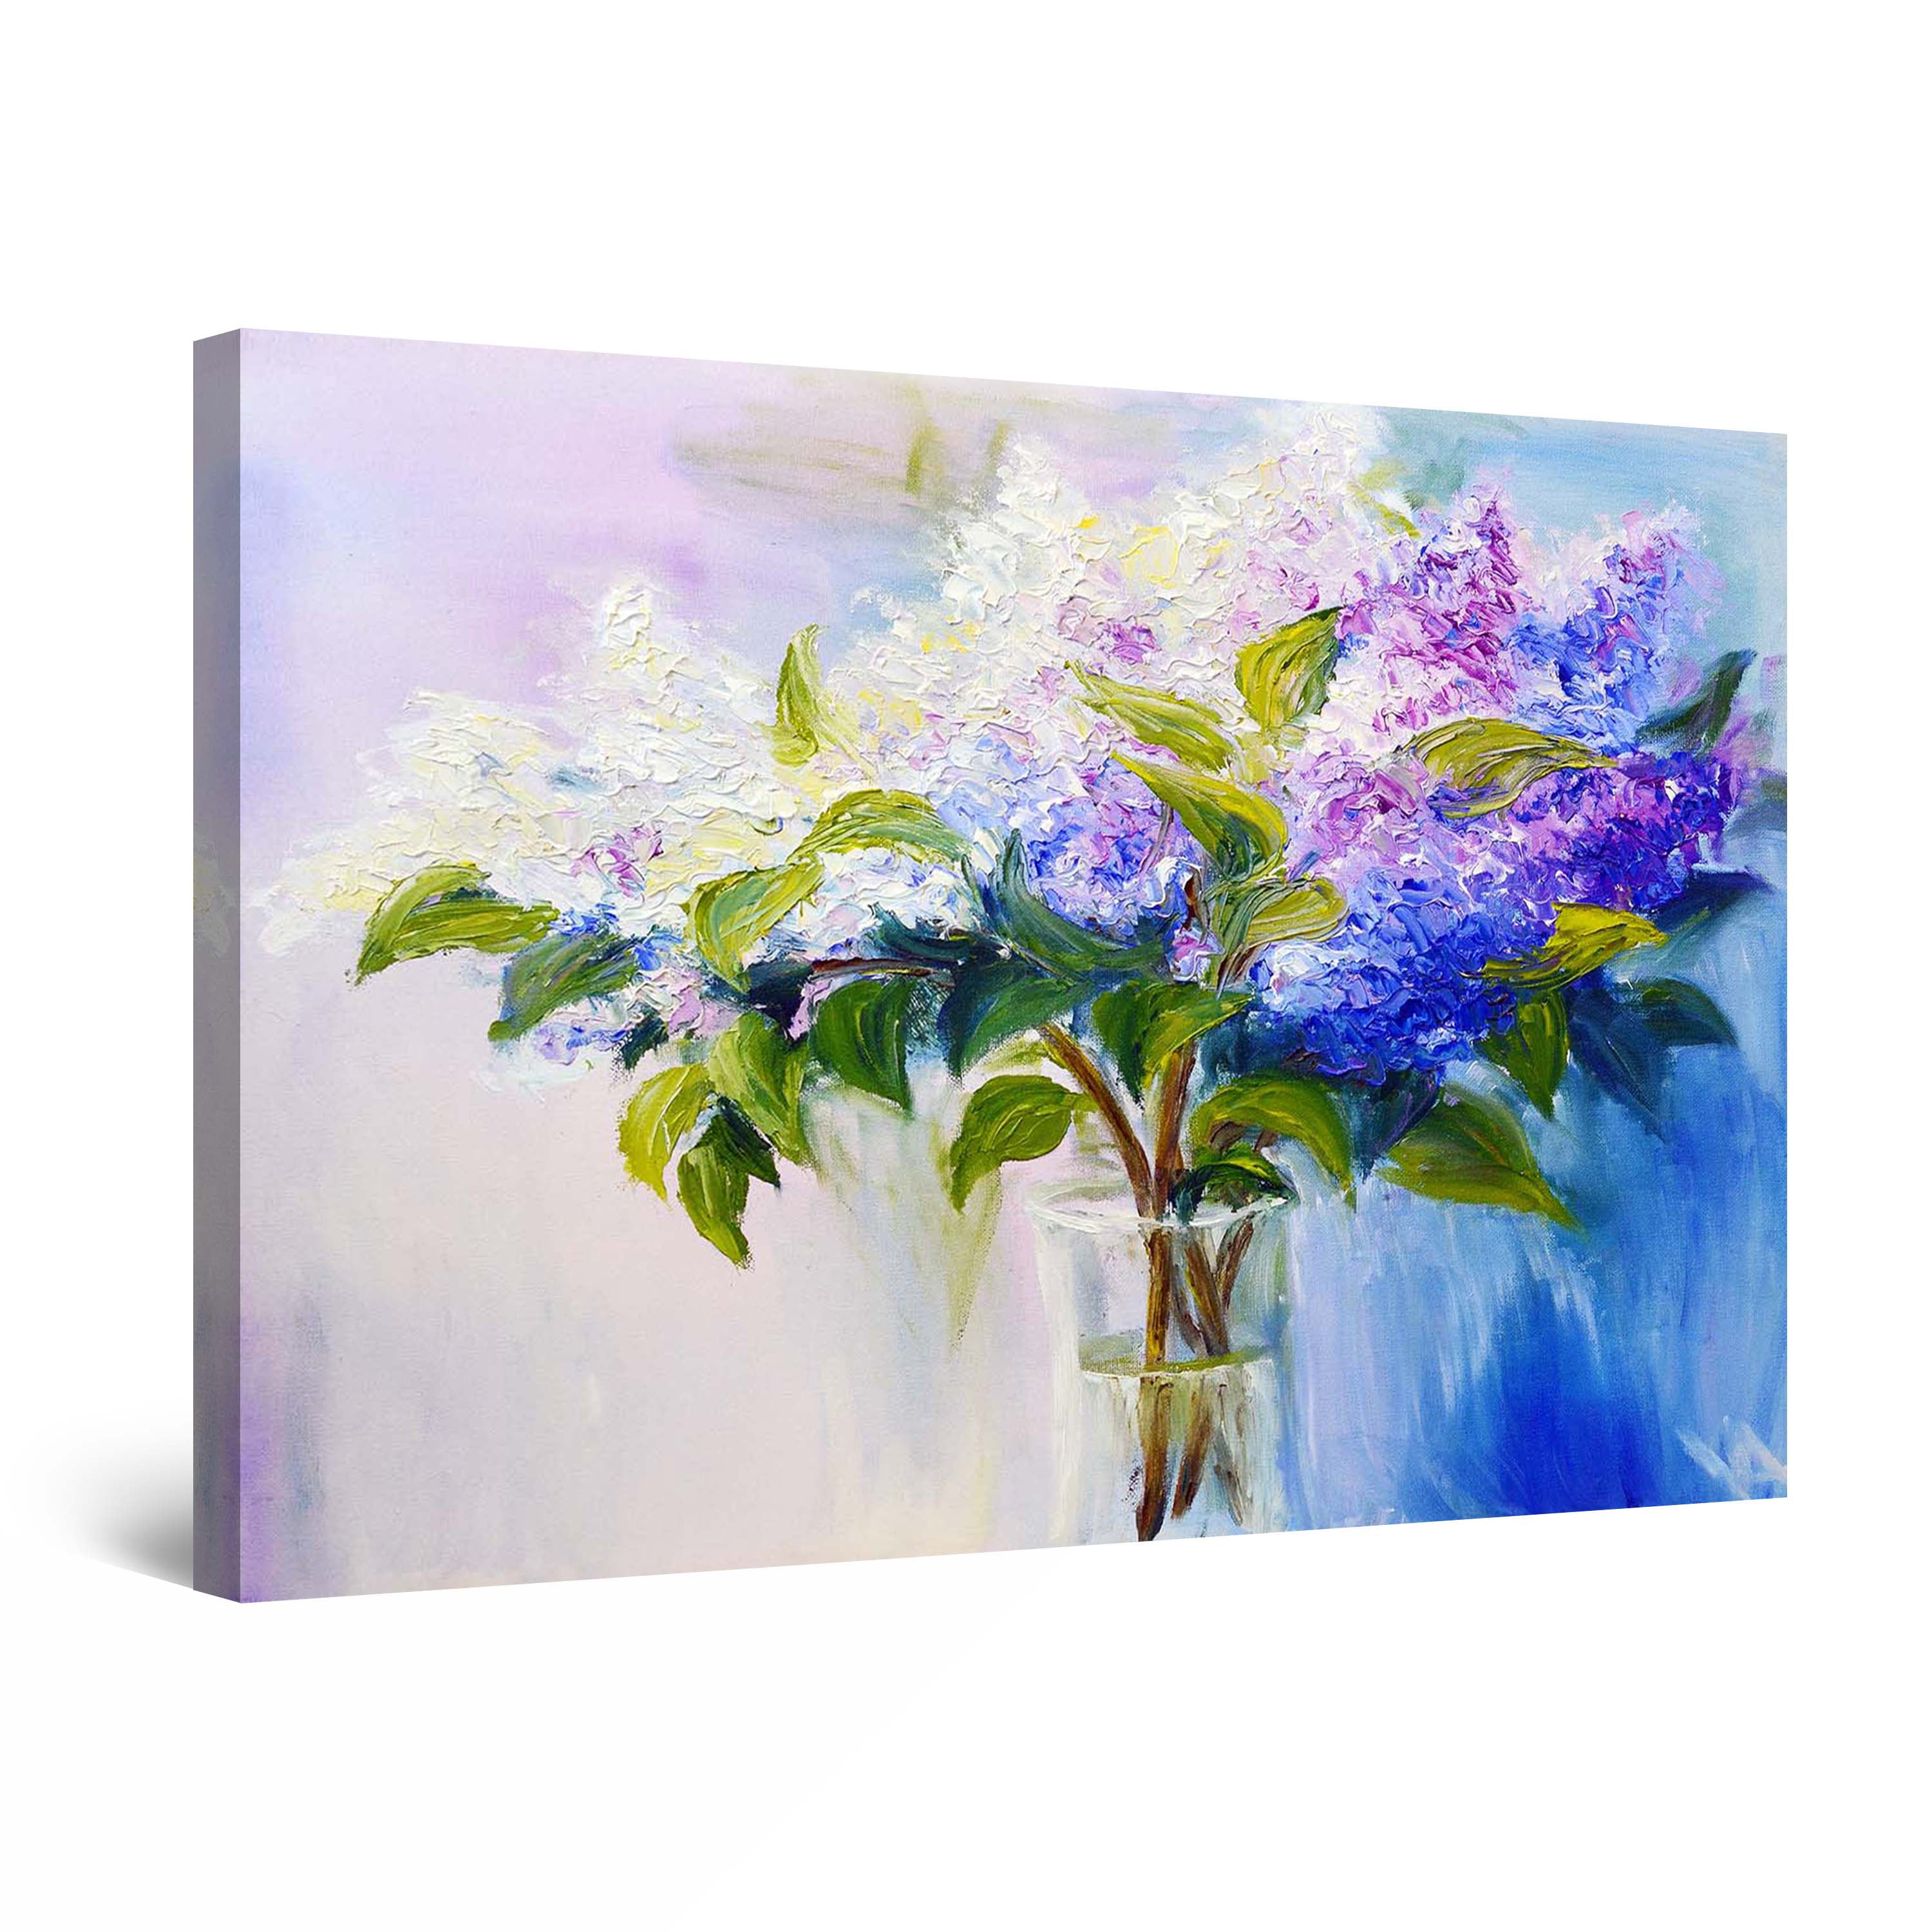 Startonight Canvas Wall Art White Blue Lilac Flowers Painting Large Painting Framed 32" x 48